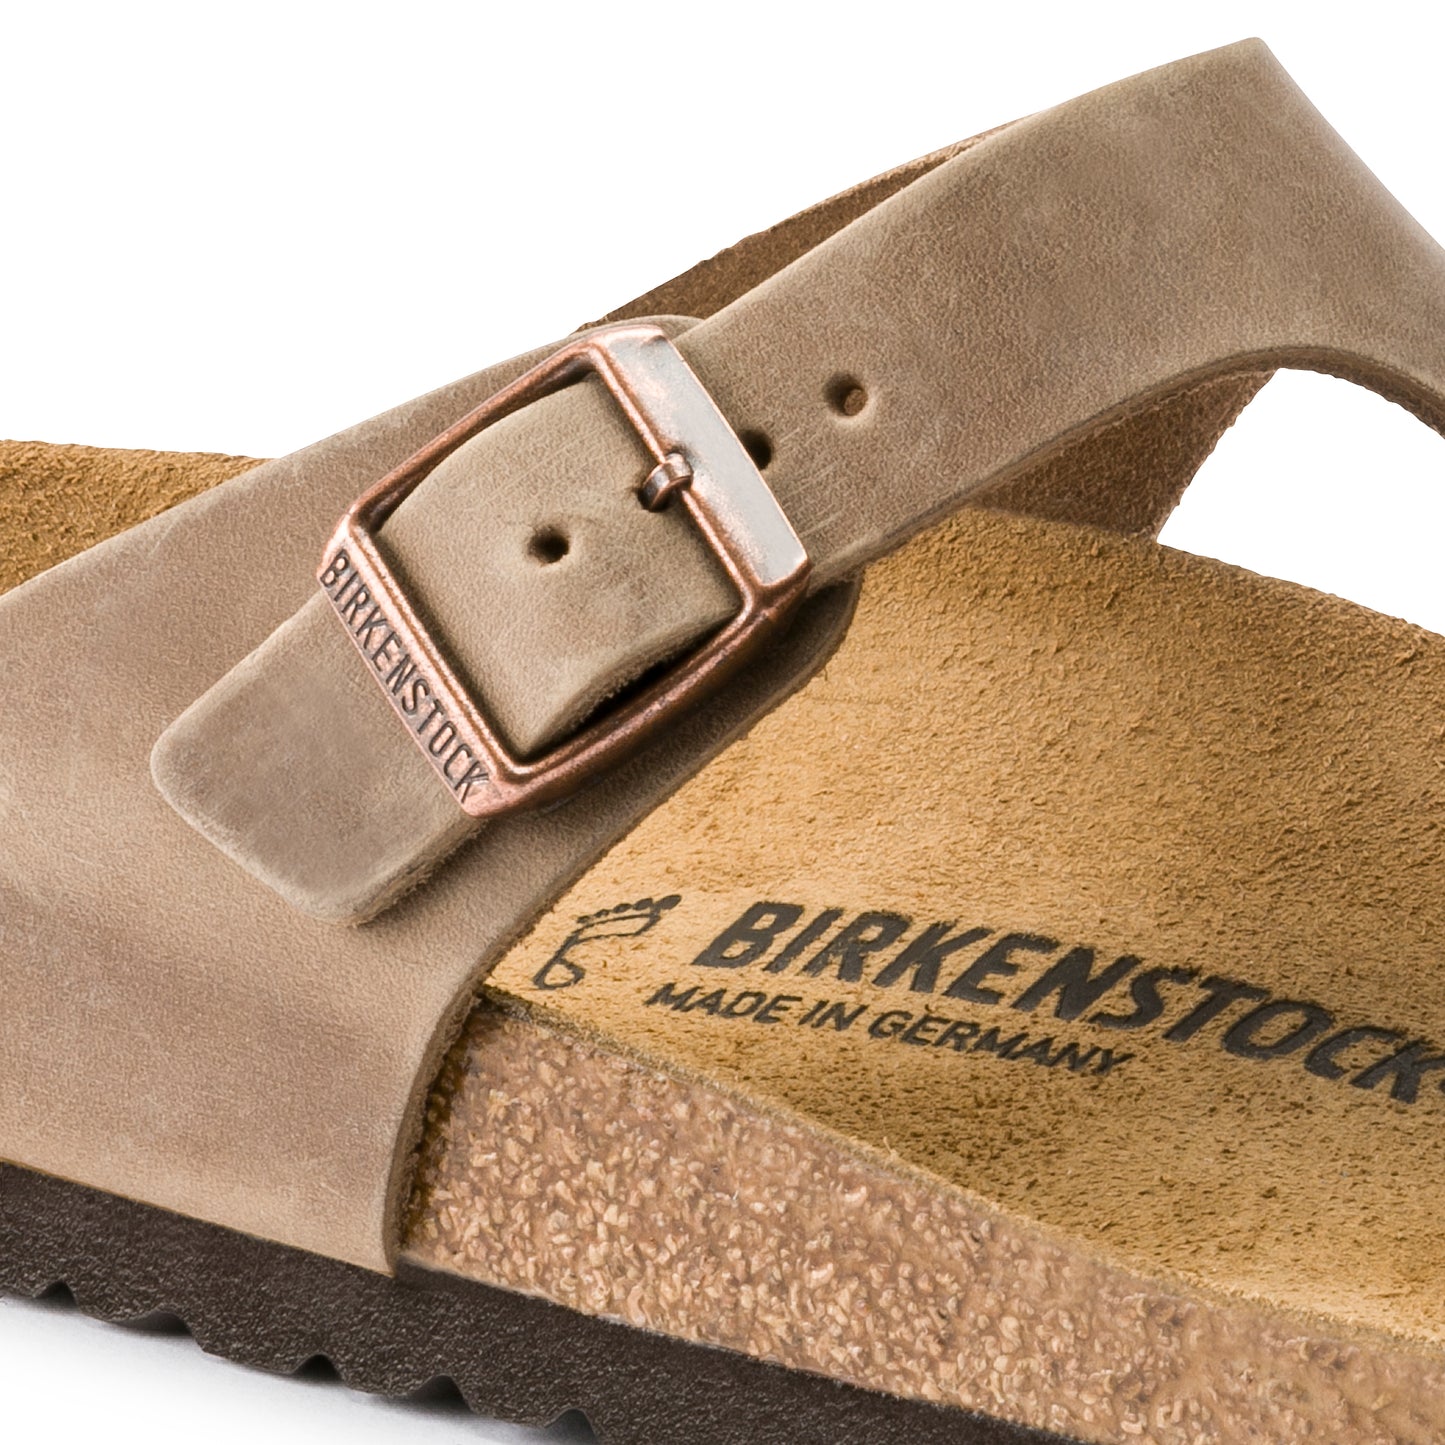 Birkenstock Gizeh Natural Leather Oiled Tabacco Brown Narrow Fit 943813